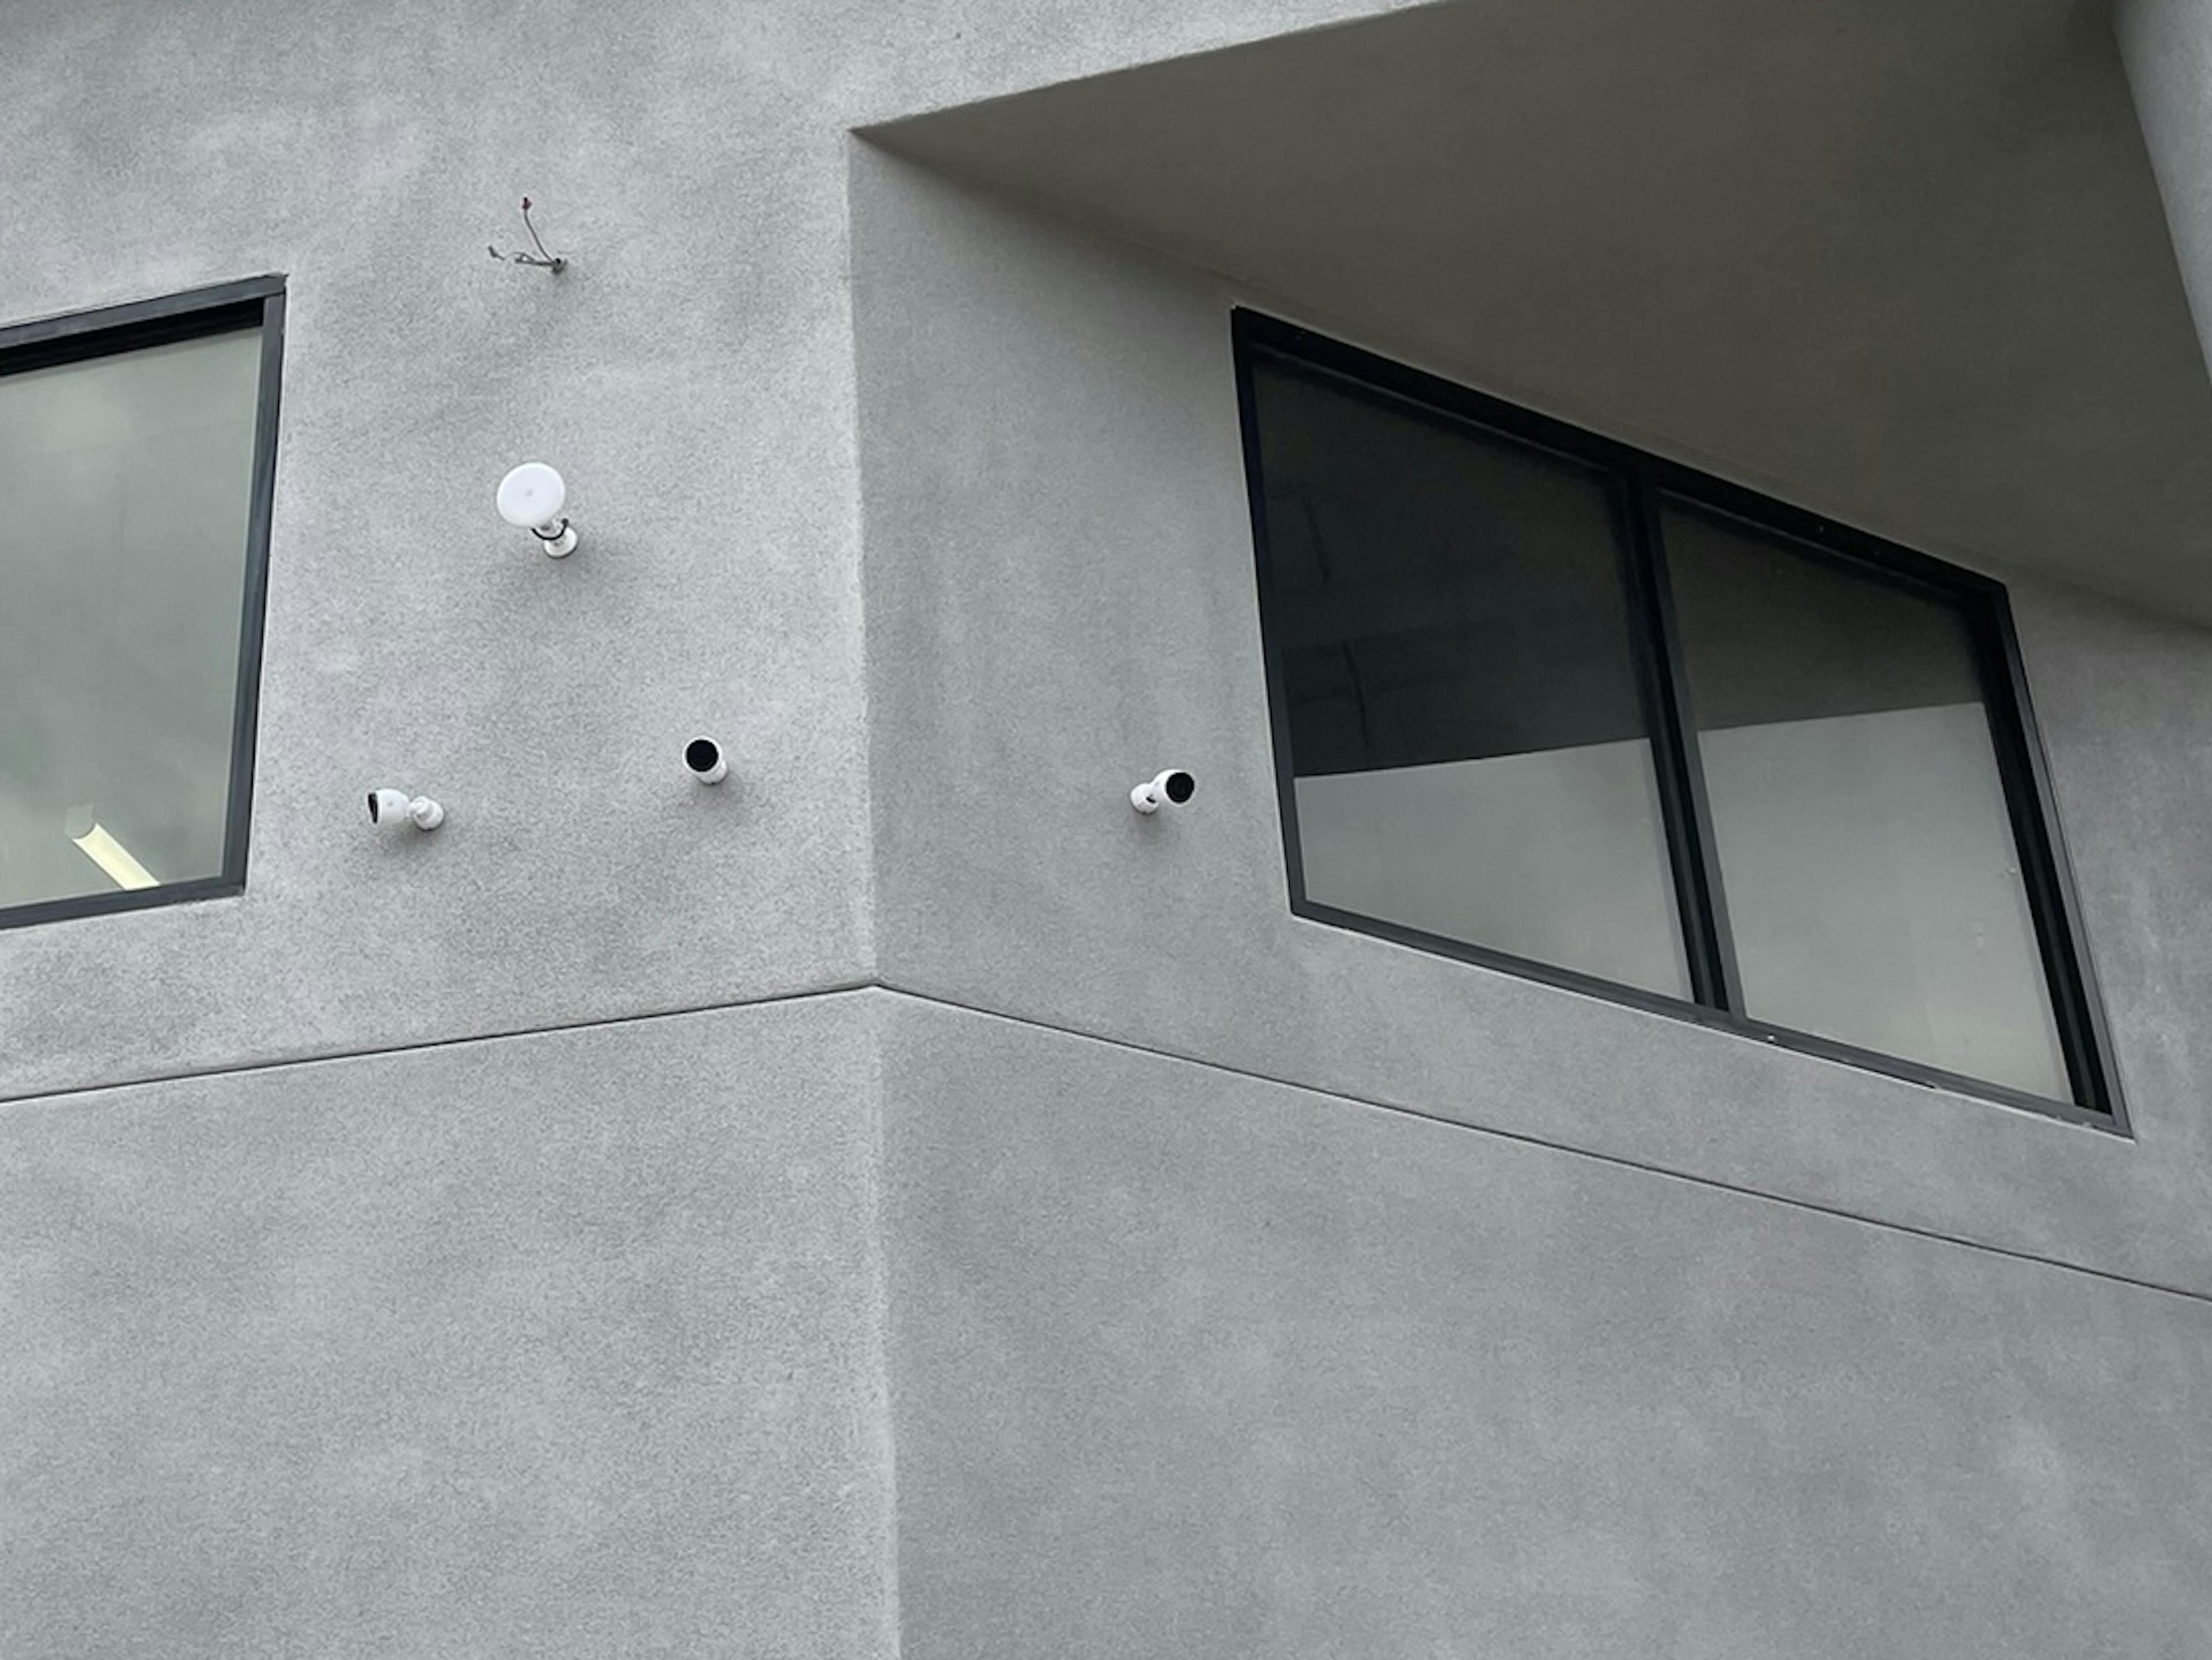 Security cameras installed on a building